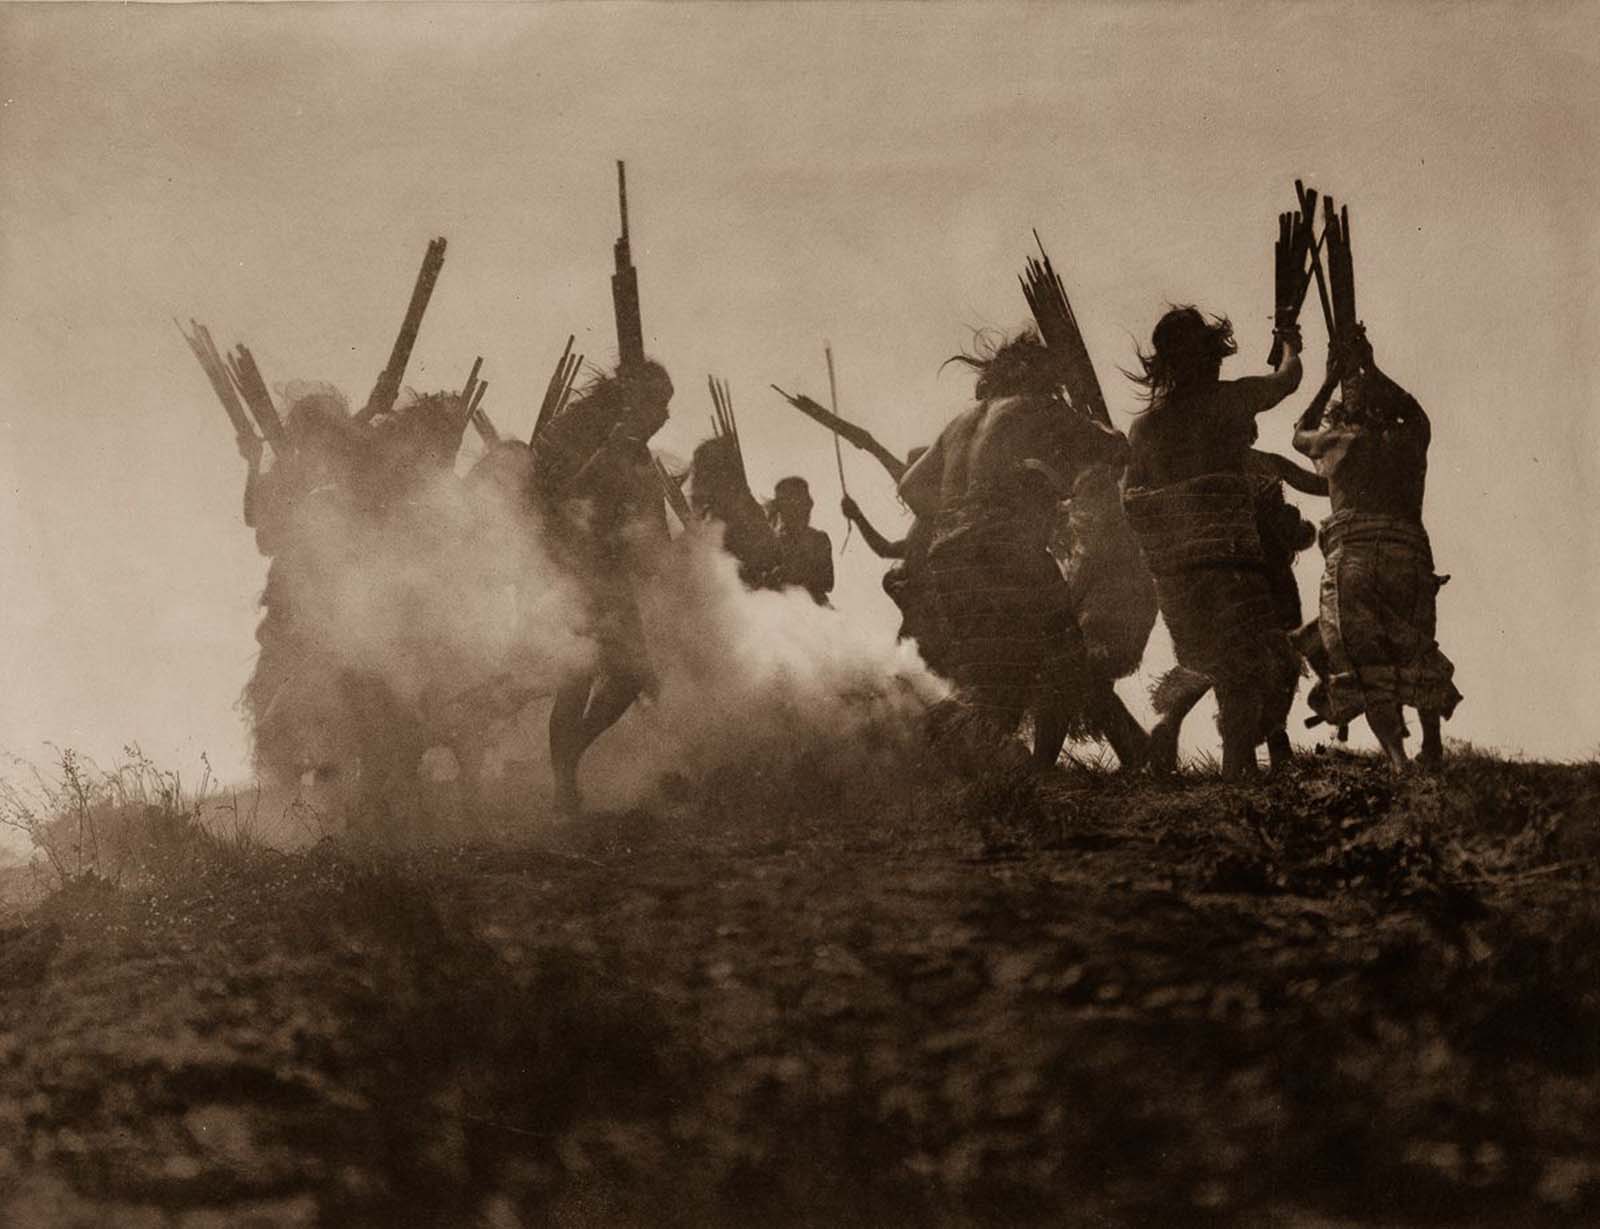 Members of the Qagyuhl tribe dance to restore an eclipsed moon. 1910.